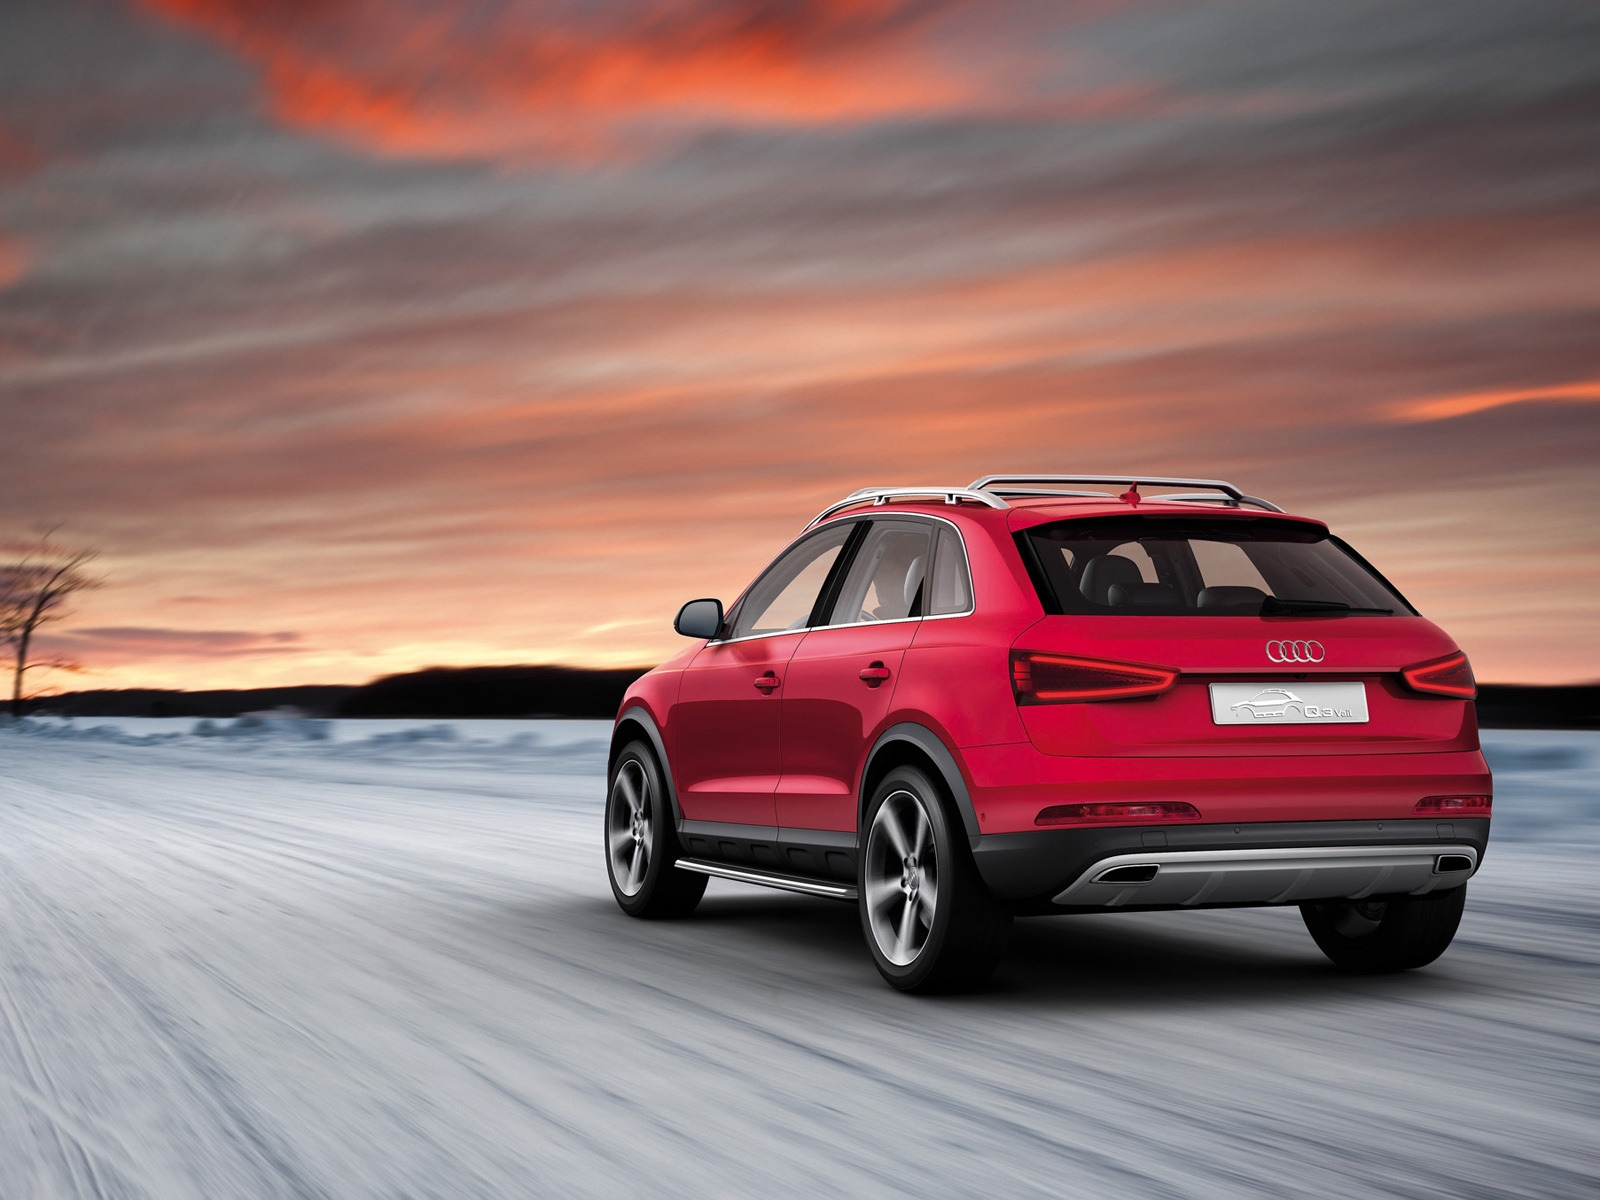 2012 Audi Q3 Vail Rear for 1600 x 1200 resolution